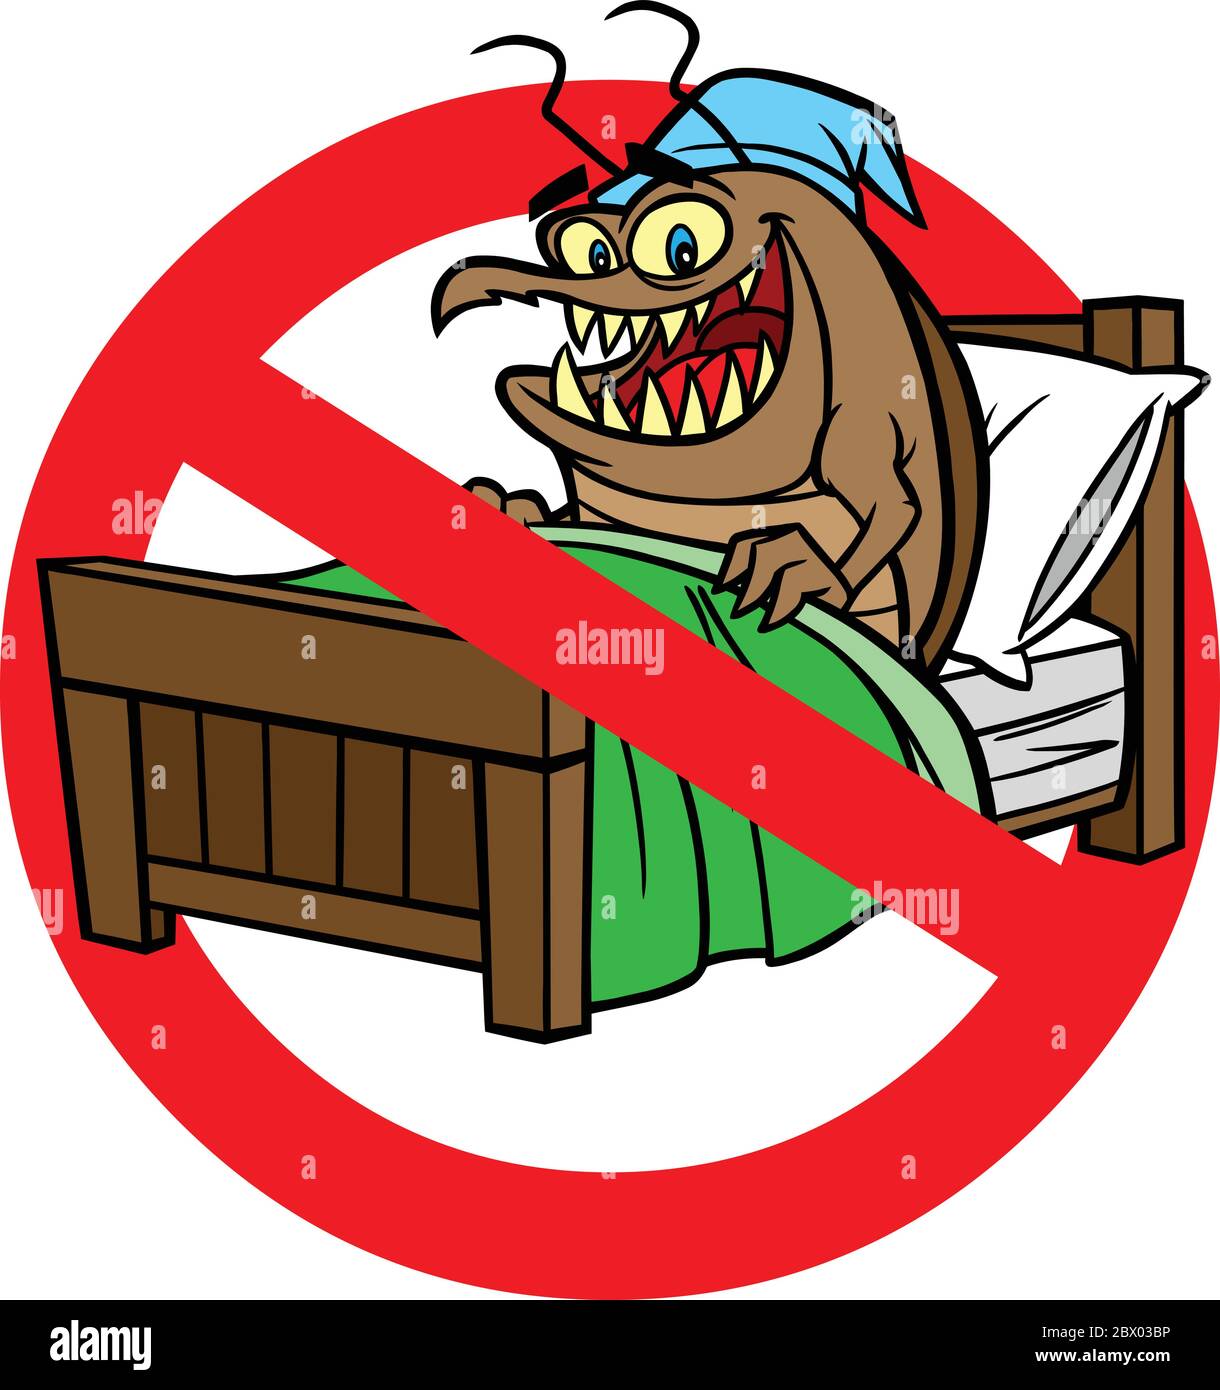 No Bed Bugs- A Cartoon Illustration of a No Bed Bugs Sign. Stock Vector